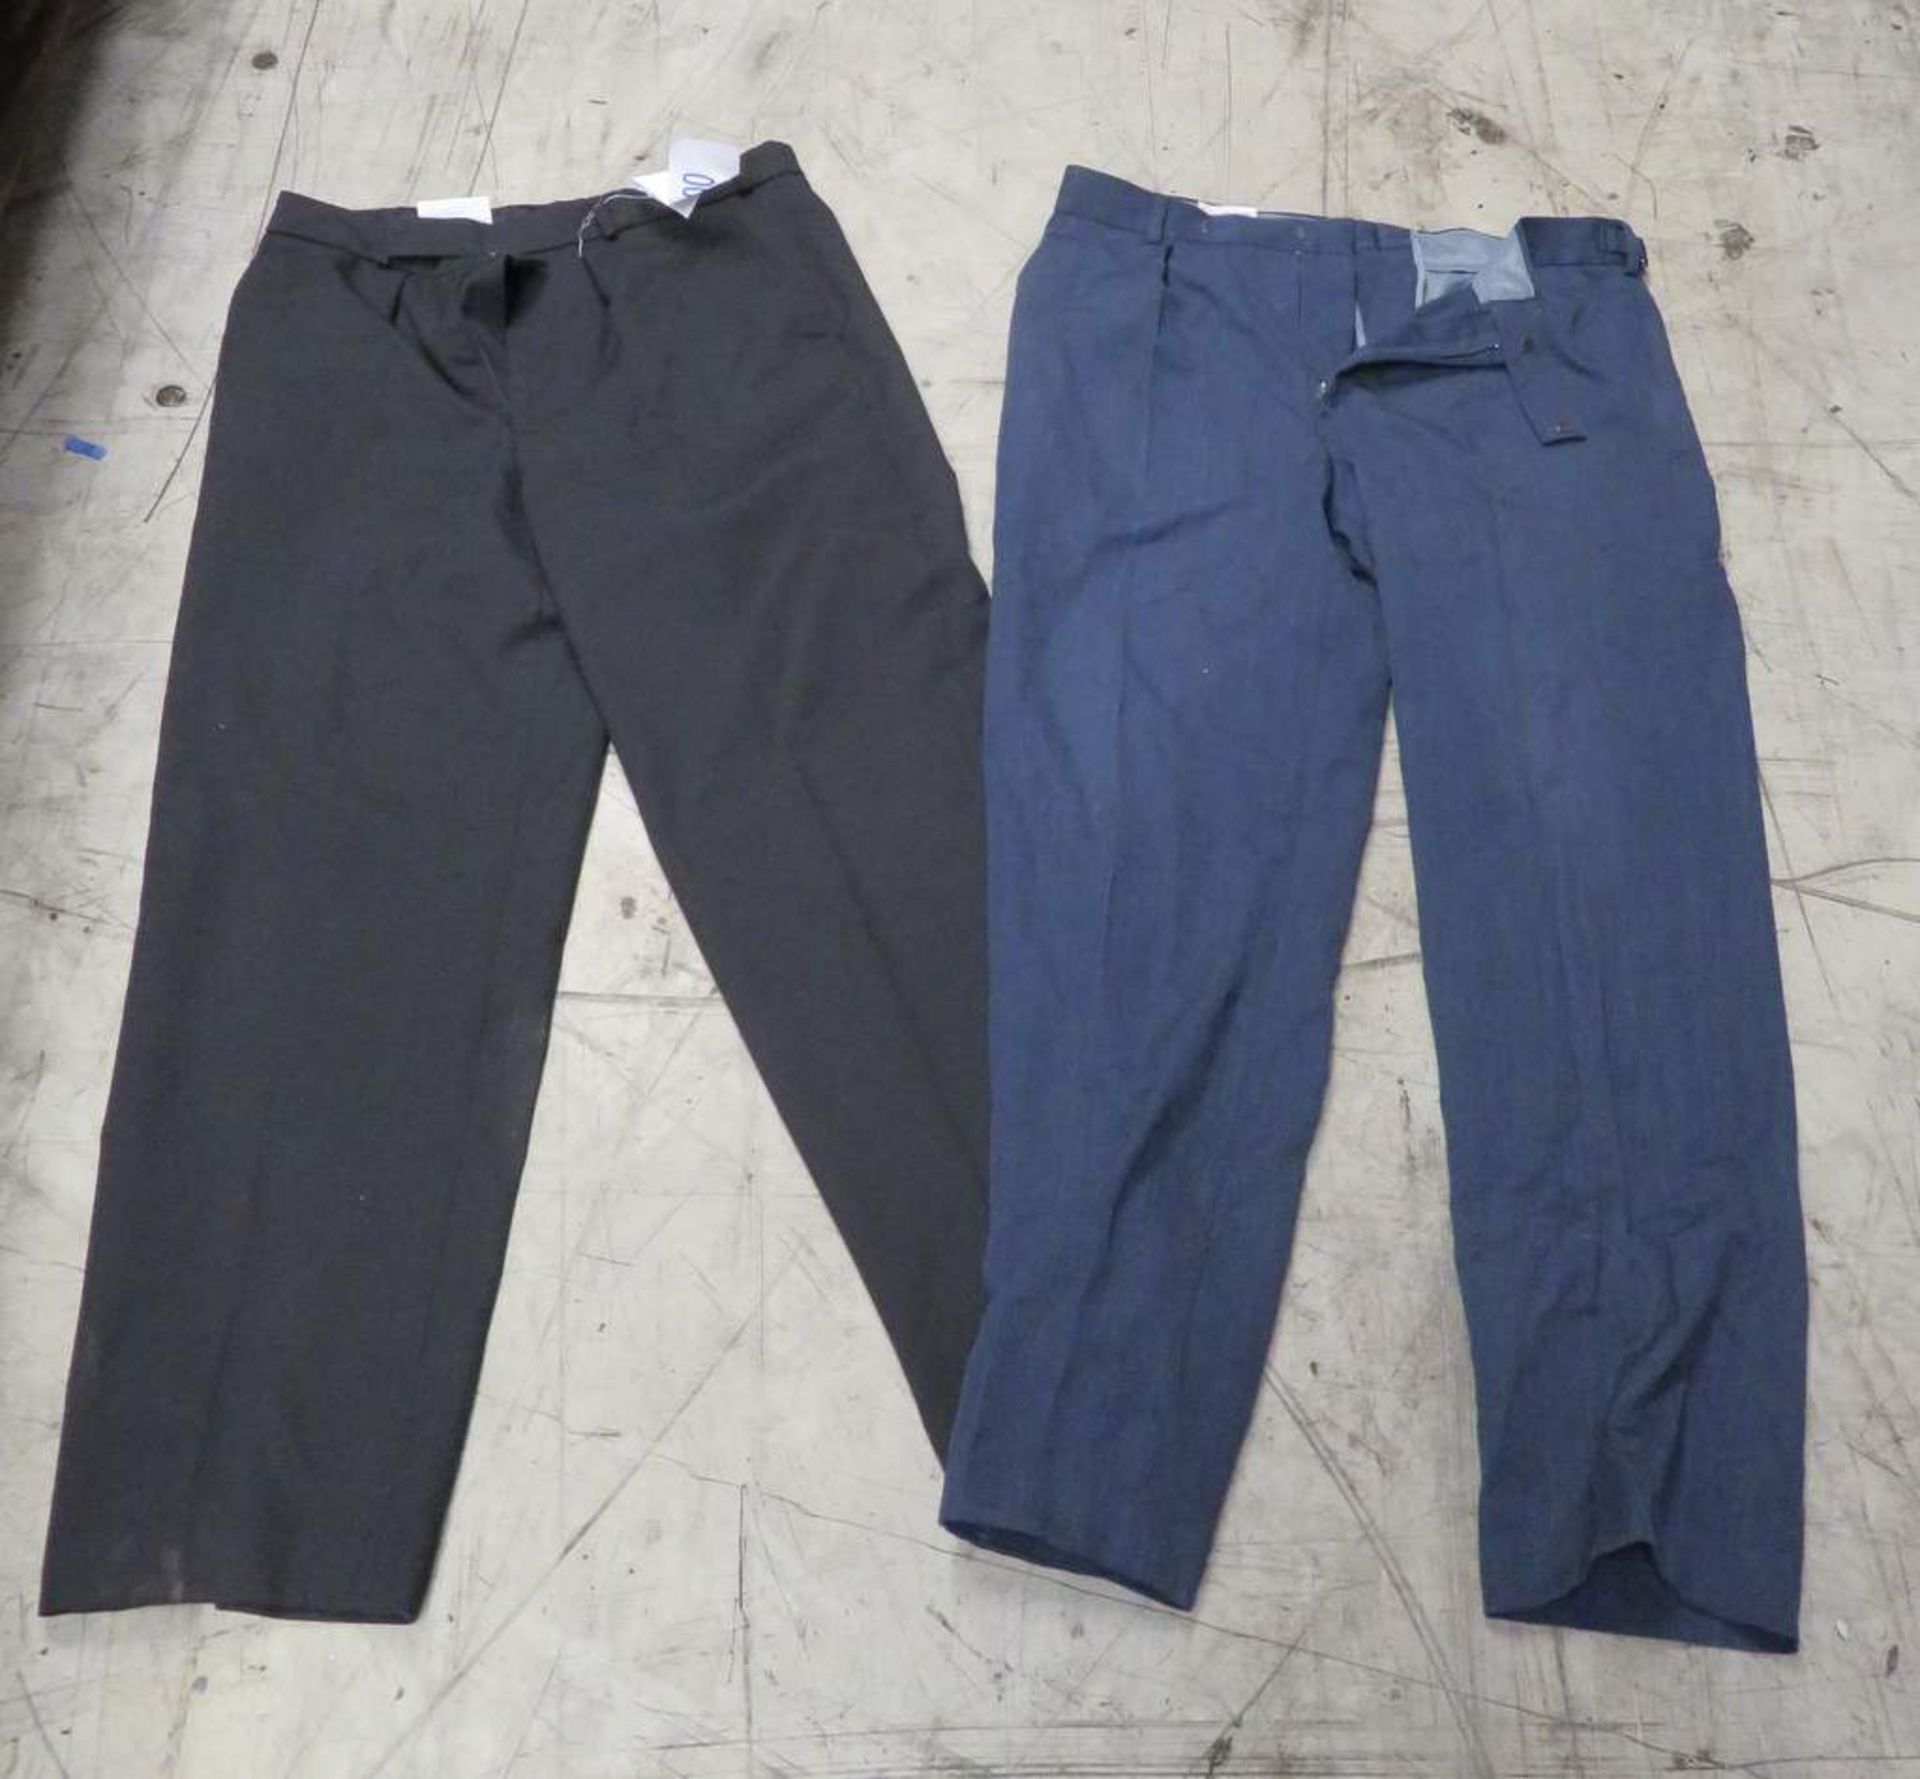 No3 & No2 Mens dress trousers black and blue - Approximately 300 - Various sizes - Image 2 of 3